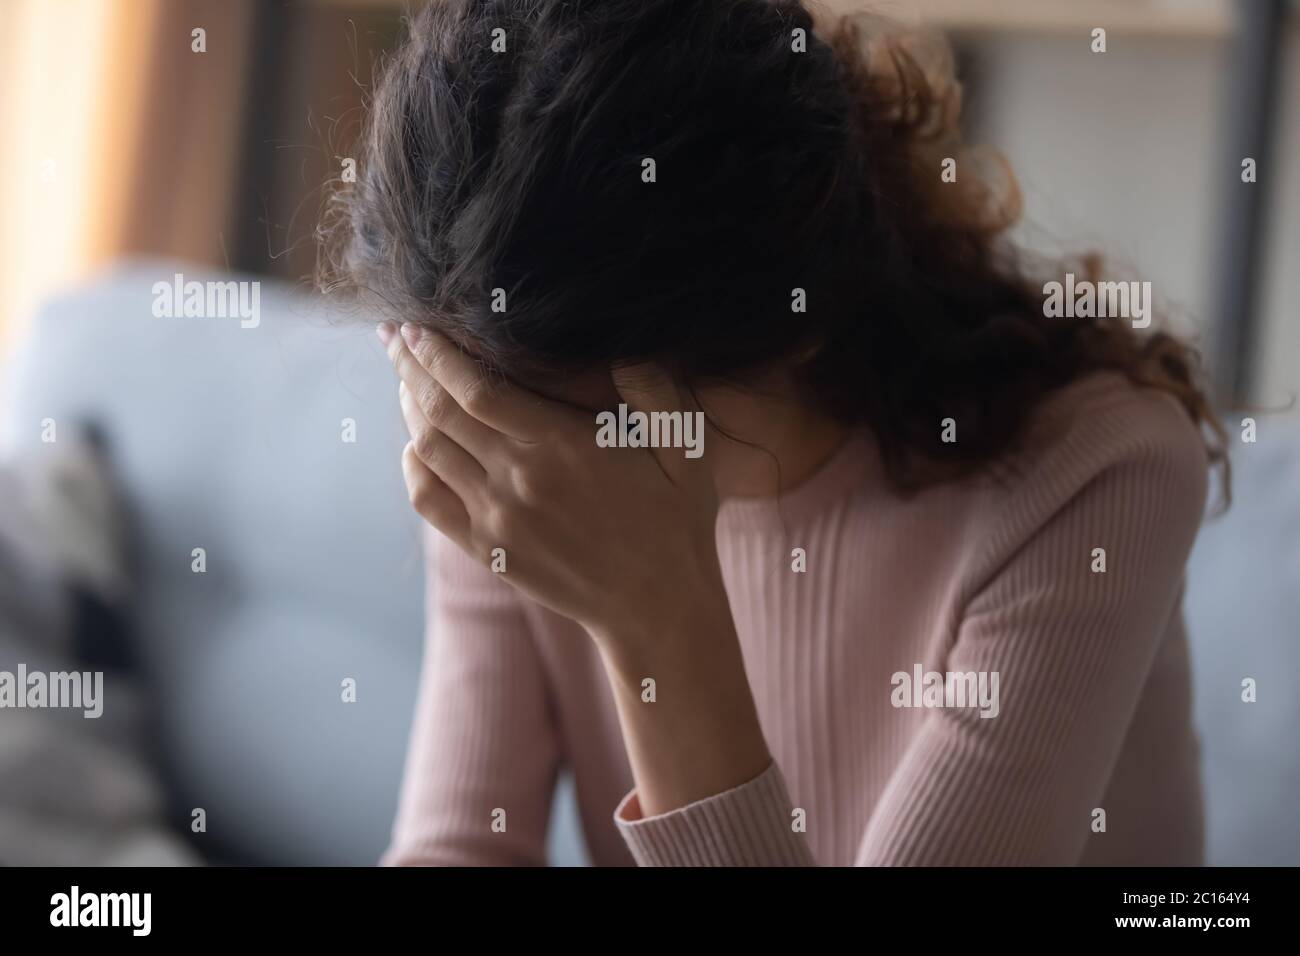 Close up frustrated depressed woman touching forehead, sitting alone Stock Photo